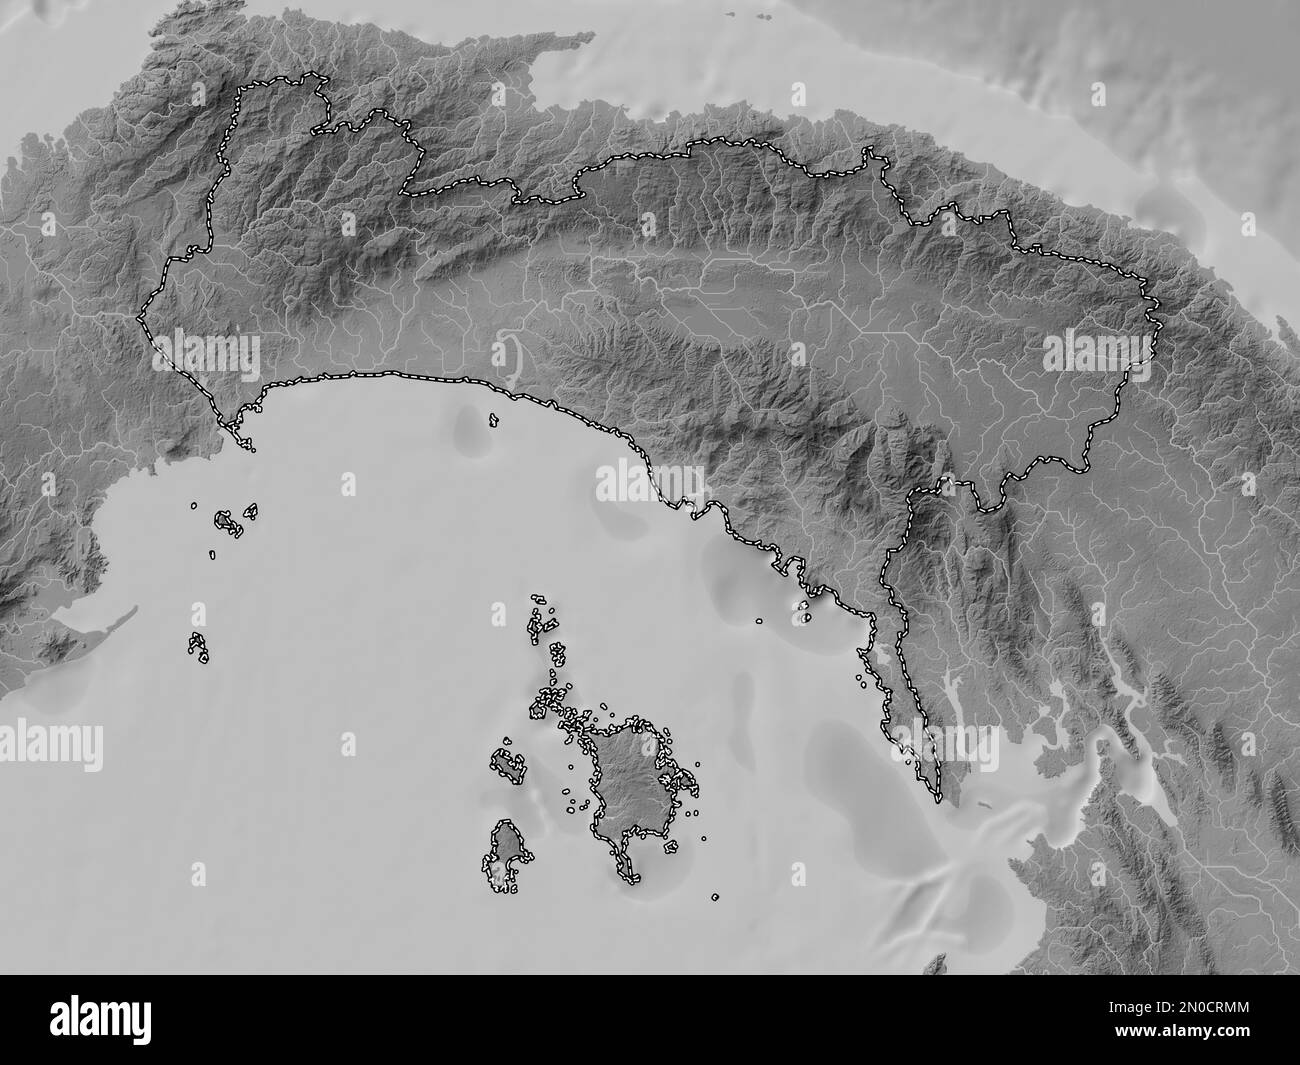 Panama, province of Panama. Grayscale elevation map with lakes and rivers Stock Photo